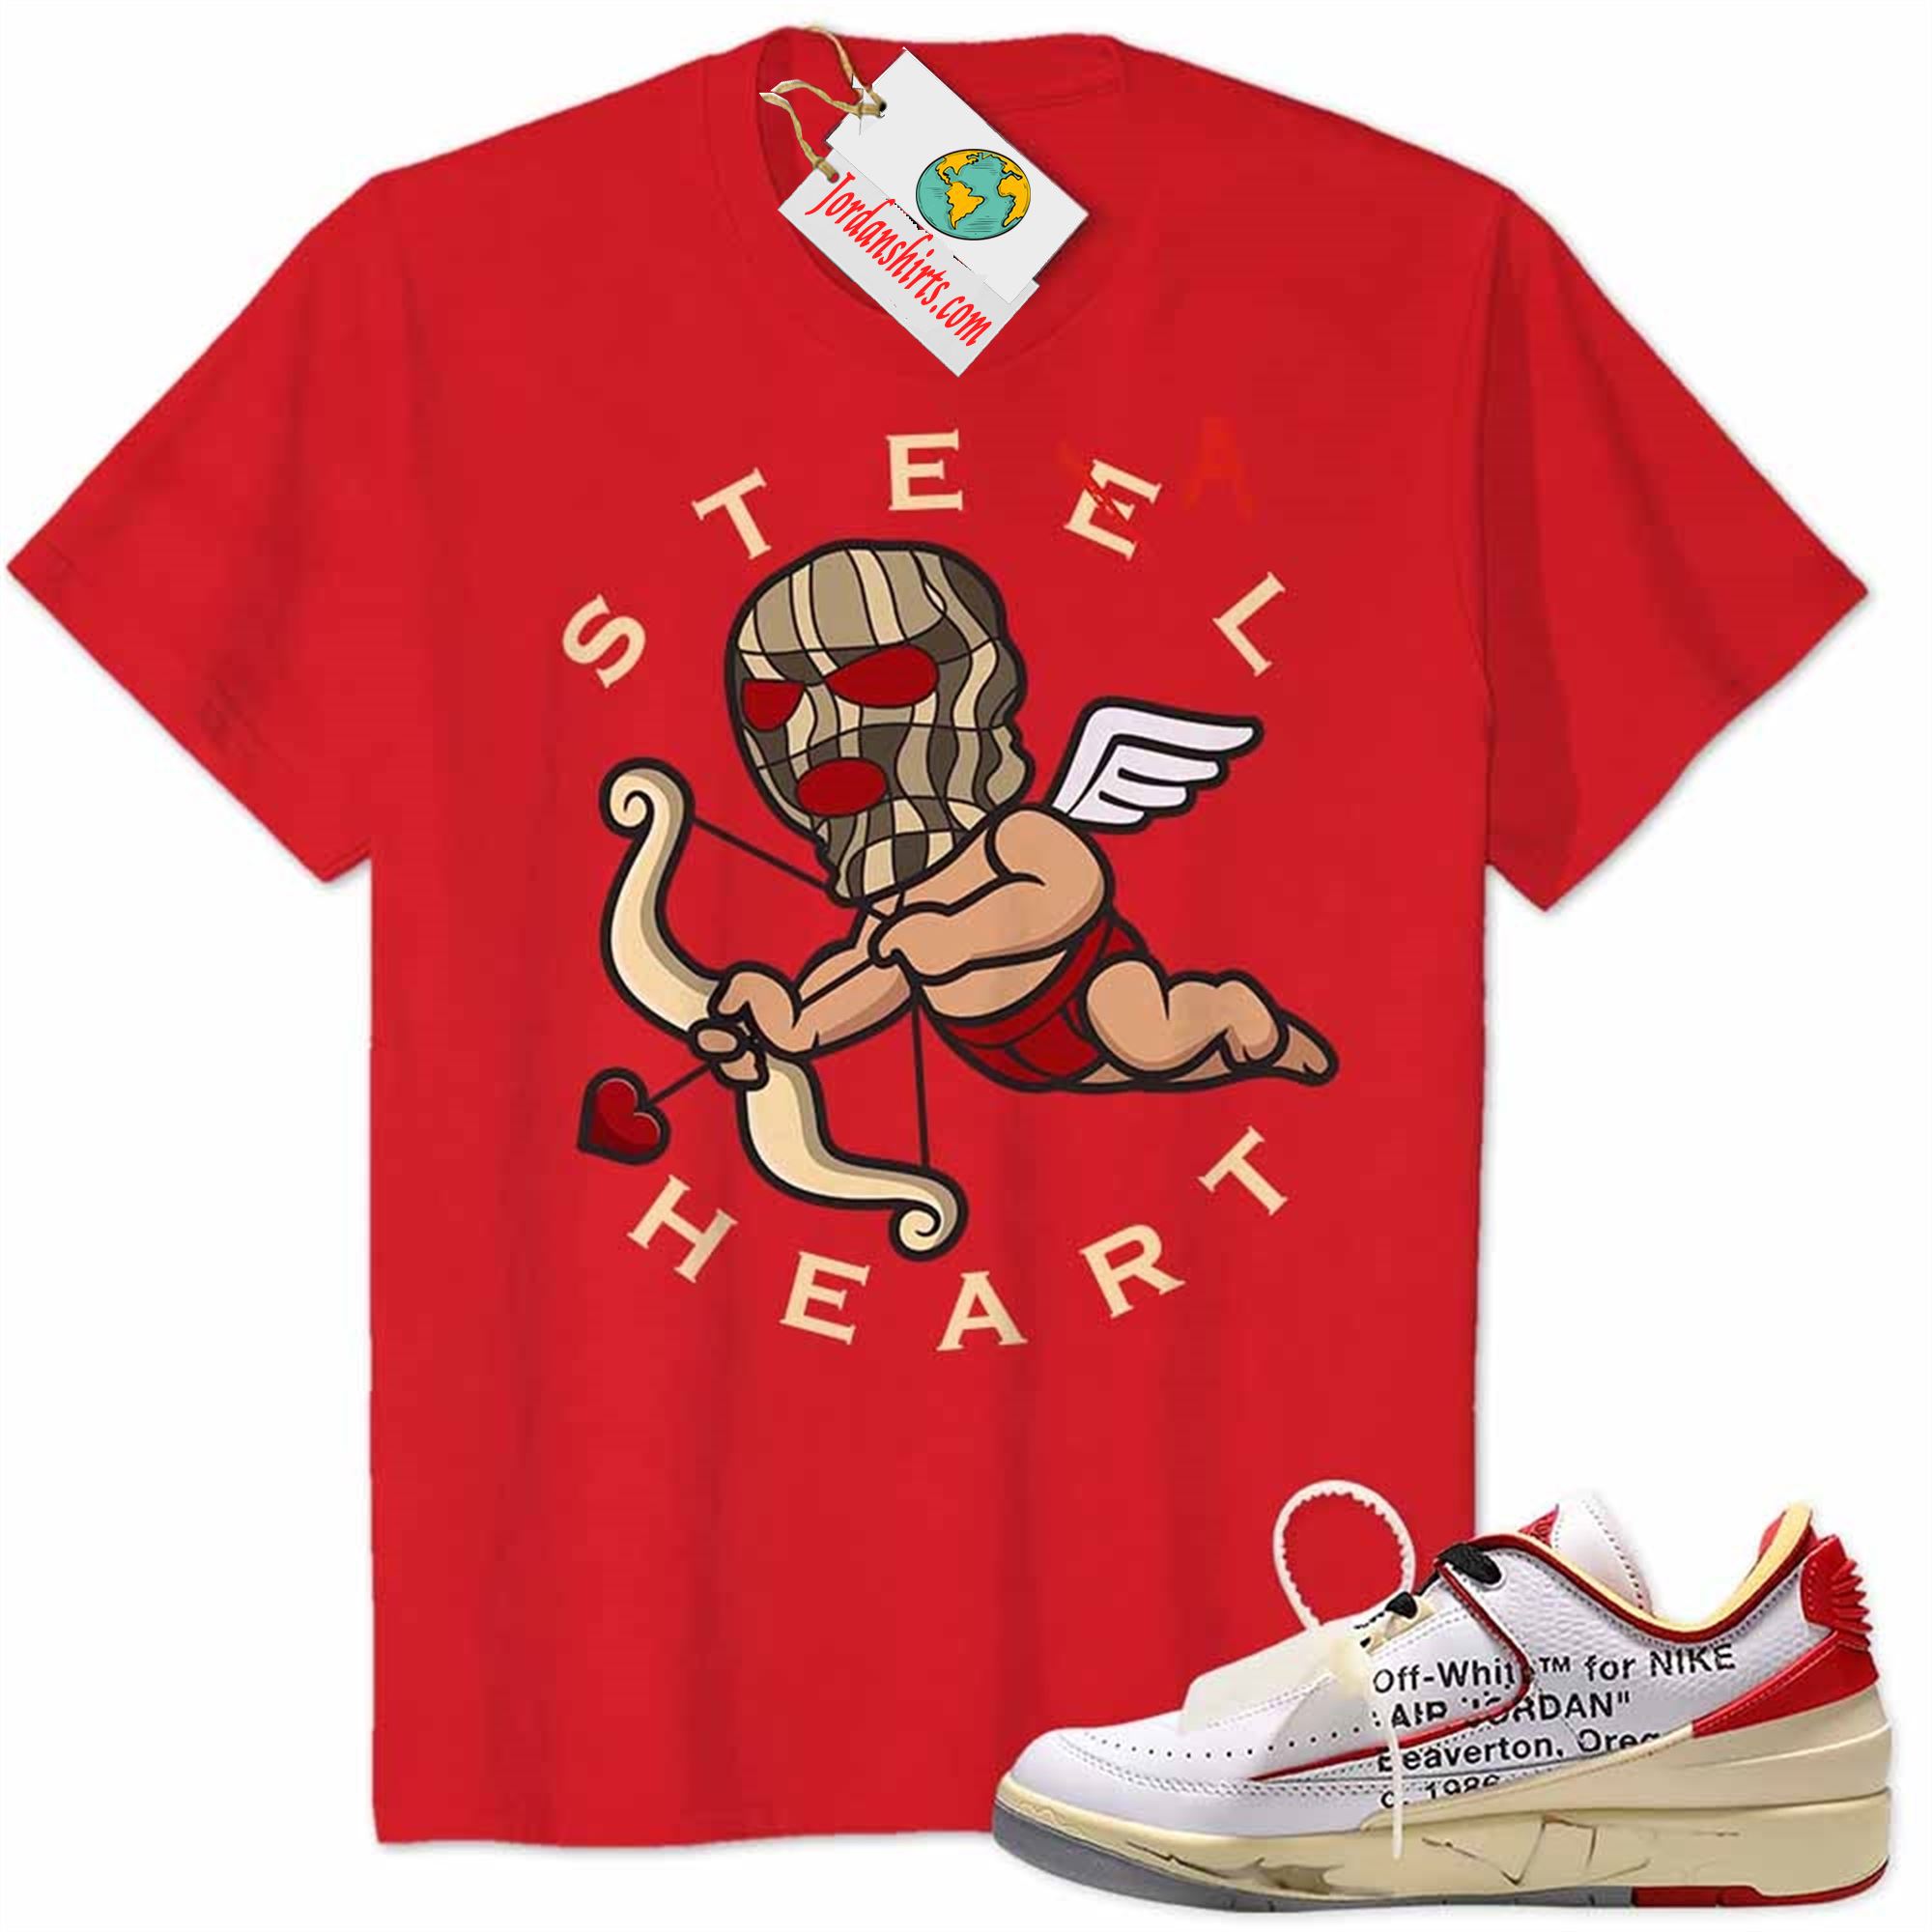 Jordan 2 Shirt, Steel Steal Heart Cupid Gangster Angel Ski Mask Red Air Jordan 2 Low White Red Off-white 2s Size Up To 5xl